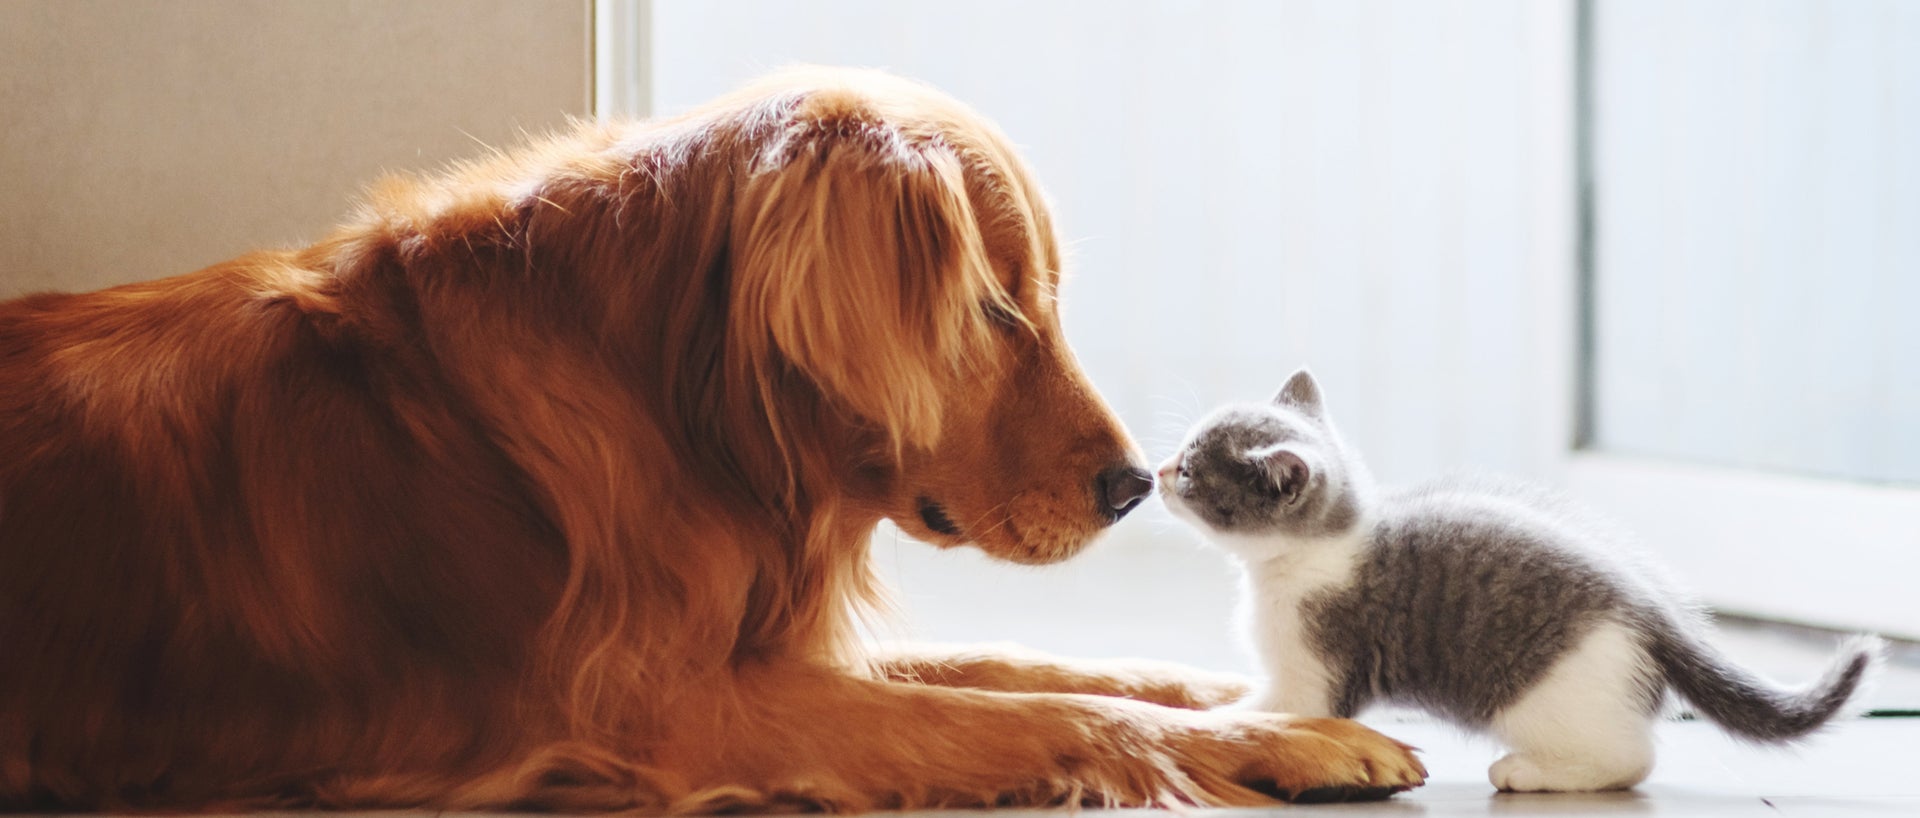 Dog and cat touching noses